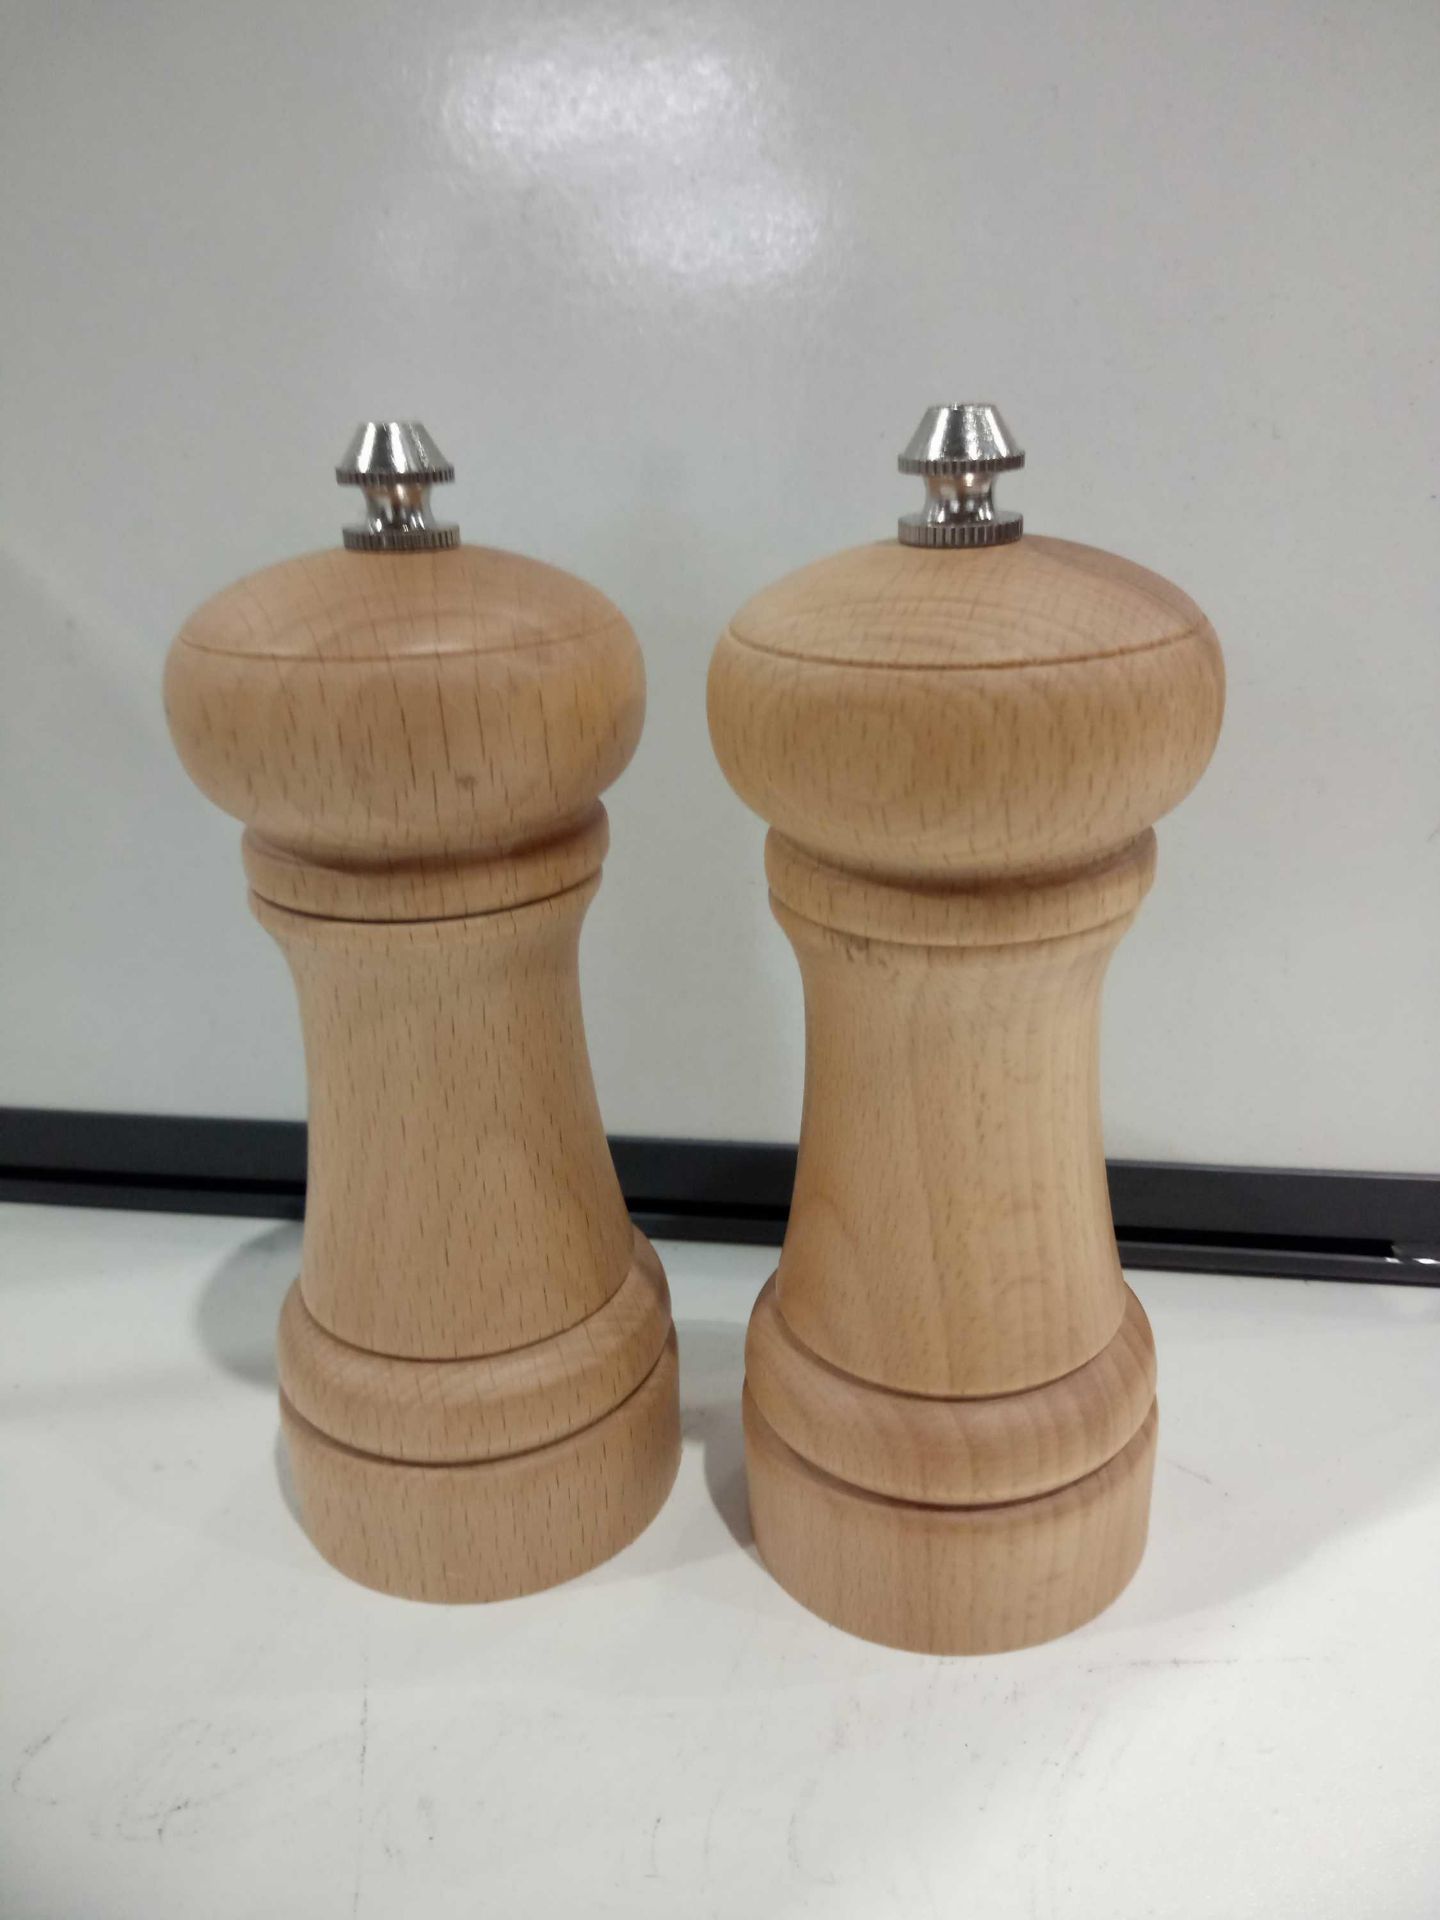 RRP £135 Assorted Kitchen Items Beech Wooden Salt And Pepper Mill Set, Walnuts Salt And Pepper Mills - Image 2 of 4